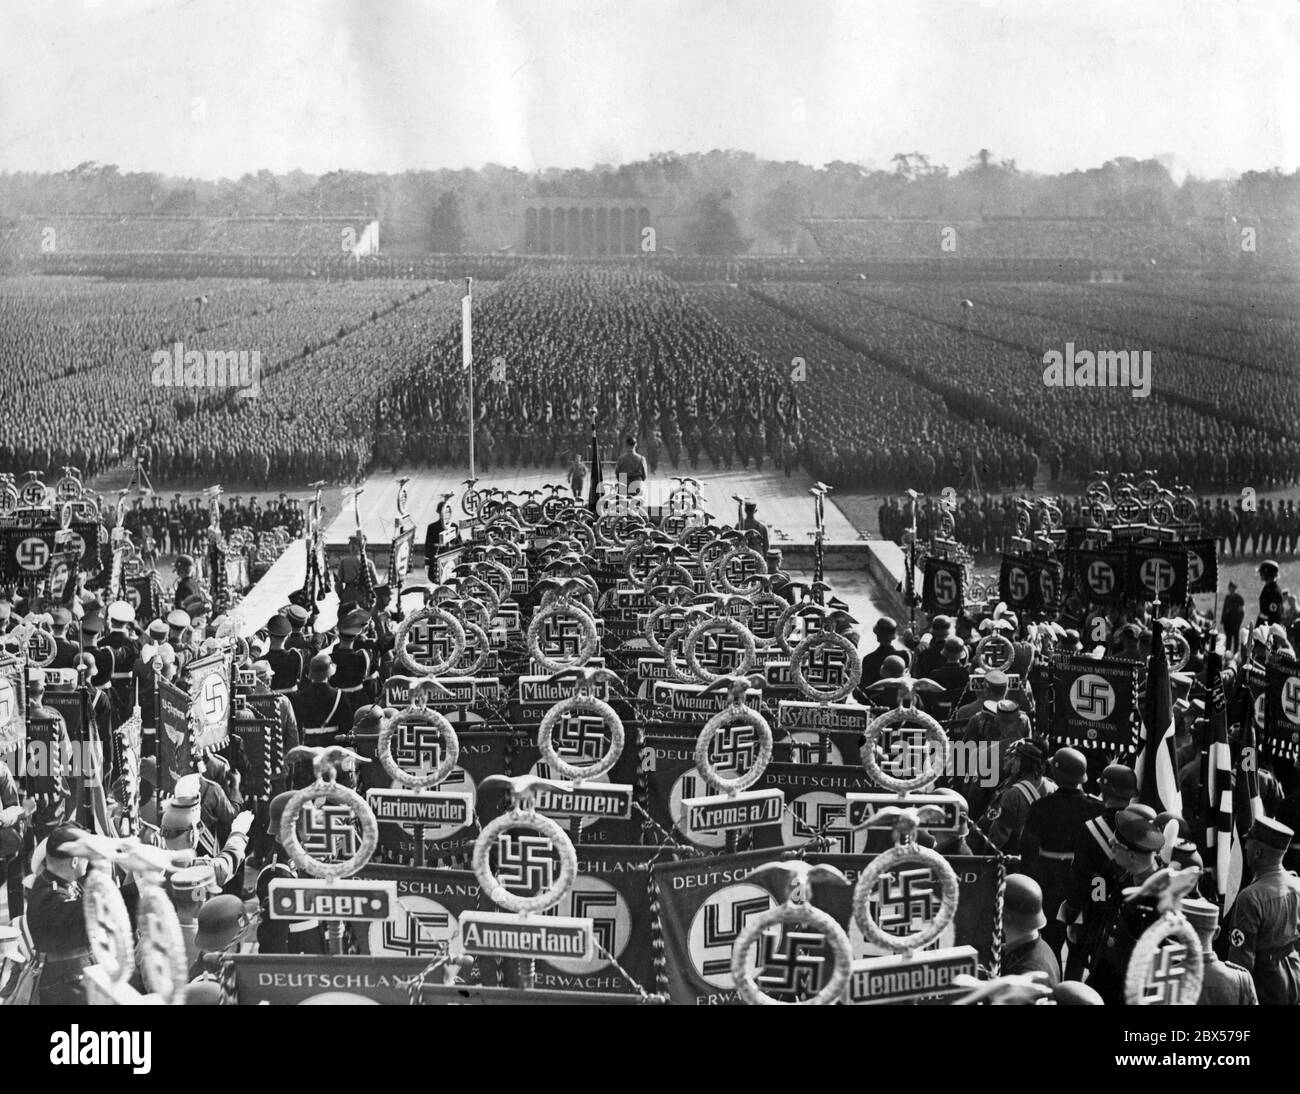 Overview of the grand roll call of SS, SA, NSKK and NSFK in the Luitpold Arena on the Nuremberg Nazi Party Rally Grounds during the flag march. Adolf Hitler is standing on the pulpit. In the foreground are standards of the SS and SA (Leer, Ammerland, Henneberg, Krems, Marienwerder, Bremen, Wiener Neustadt, Kyffhaeuaser, Mittelweser), in the background the Ehrenhalle (Hall of Honour). Stock Photo